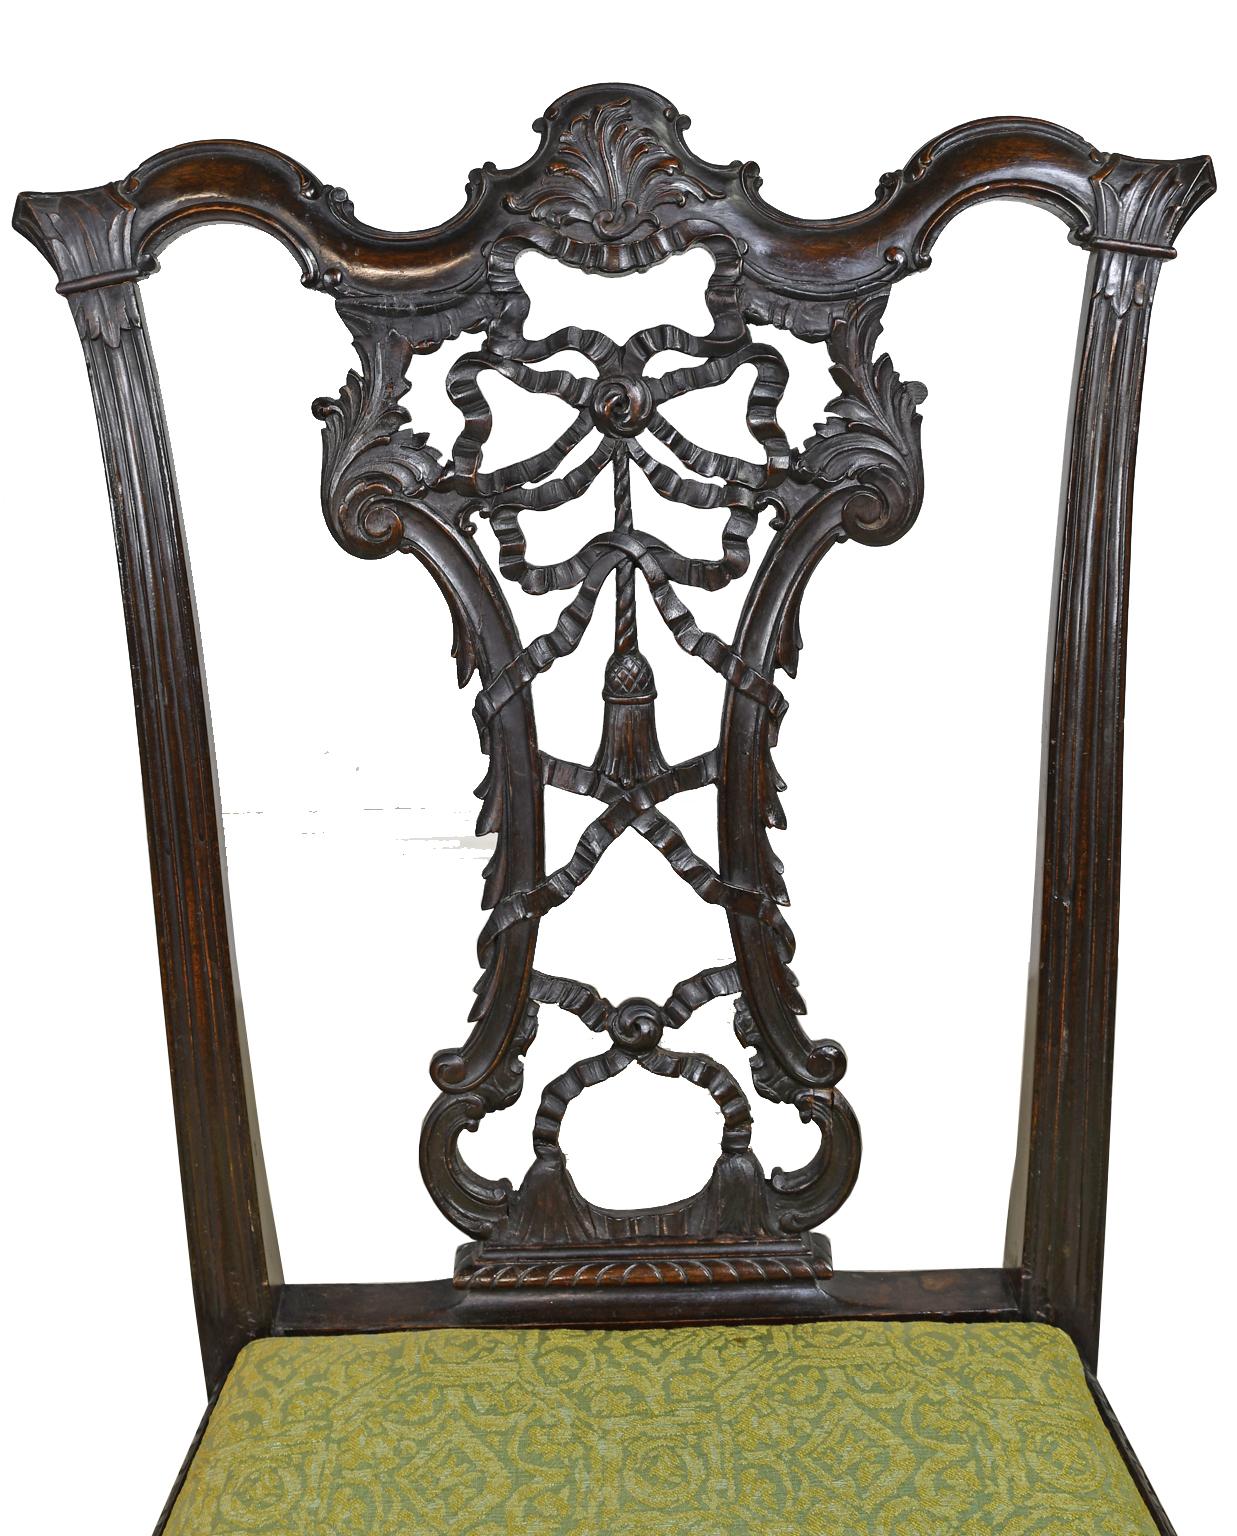 A very beautiful Rococo-Revival, Chippendale style chair in mahogany with ribbon-back carving. Exquisitely carved and articulated ribbon back framed by acanthus carved foliates. Chair knees and talloned claw feet are well-articulated. Slip seat is